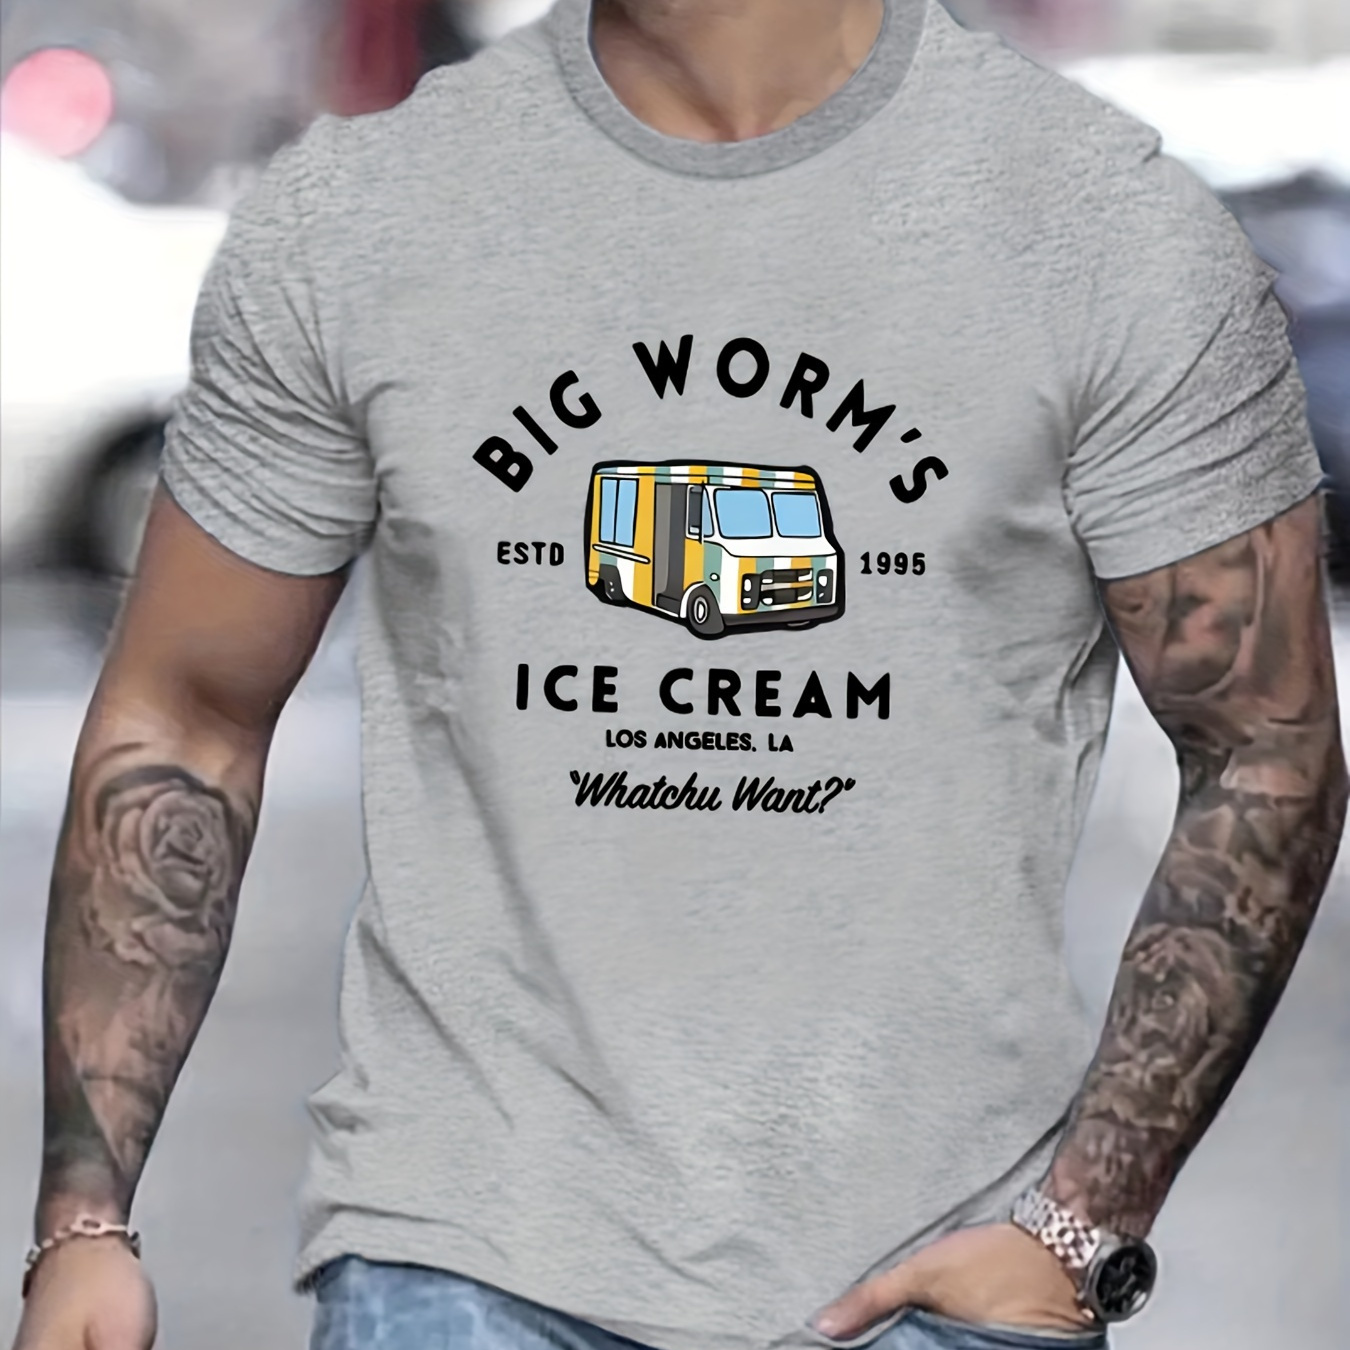 

Big Worm's Ice Cream And Anime Van Graphic Print, Men's Novel Graphic Design T-shirt, Casual Comfy Tees For Summer, Men's Clothing Tops For Daily Activities